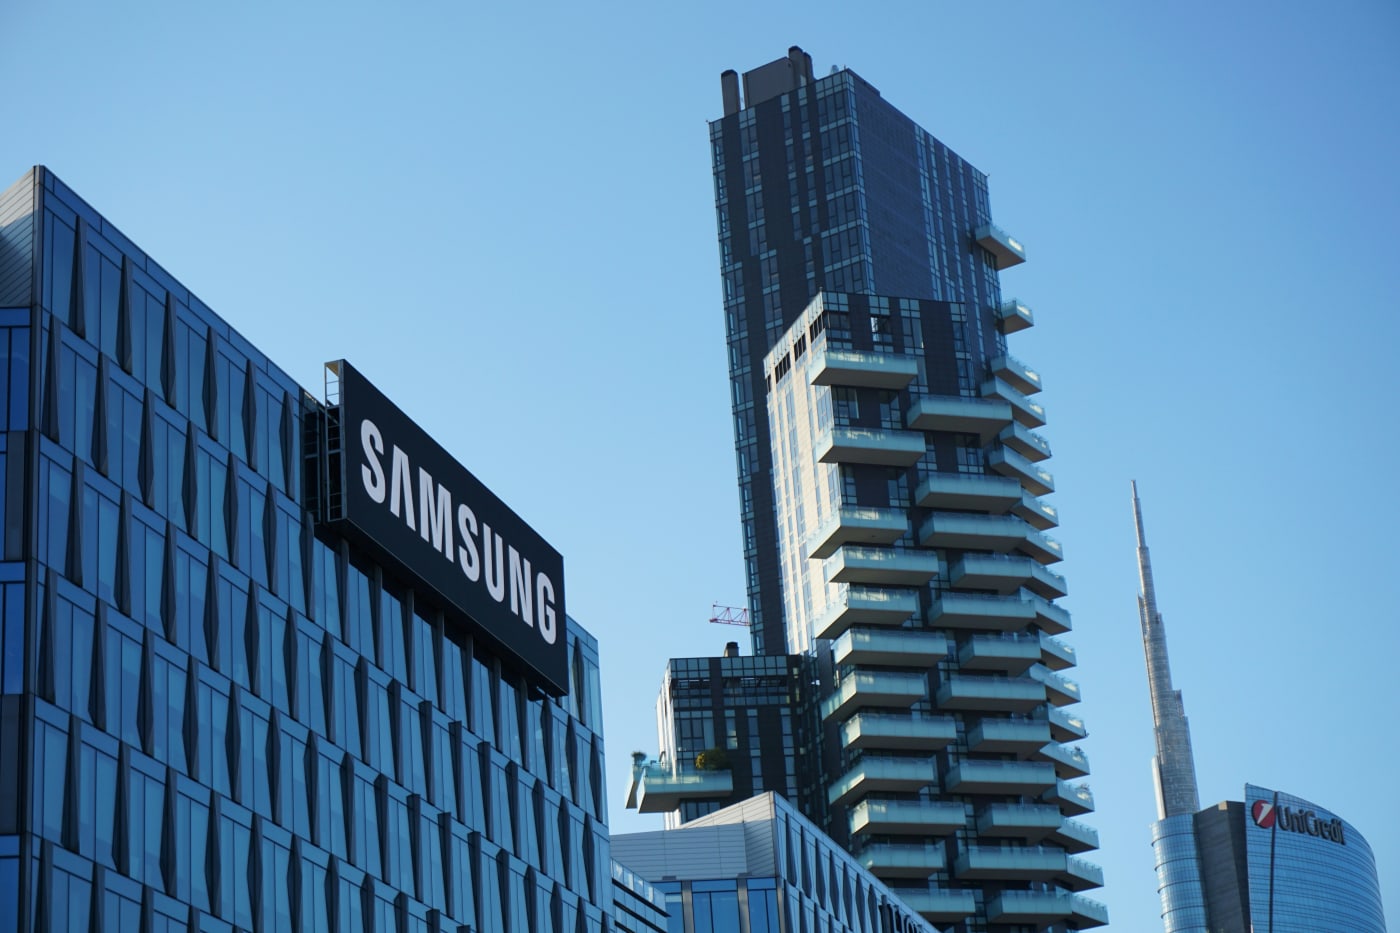 Samsung awarded $6.4 billion CHIPS Act grant to build 'semiconductor ecosystem' in Texas